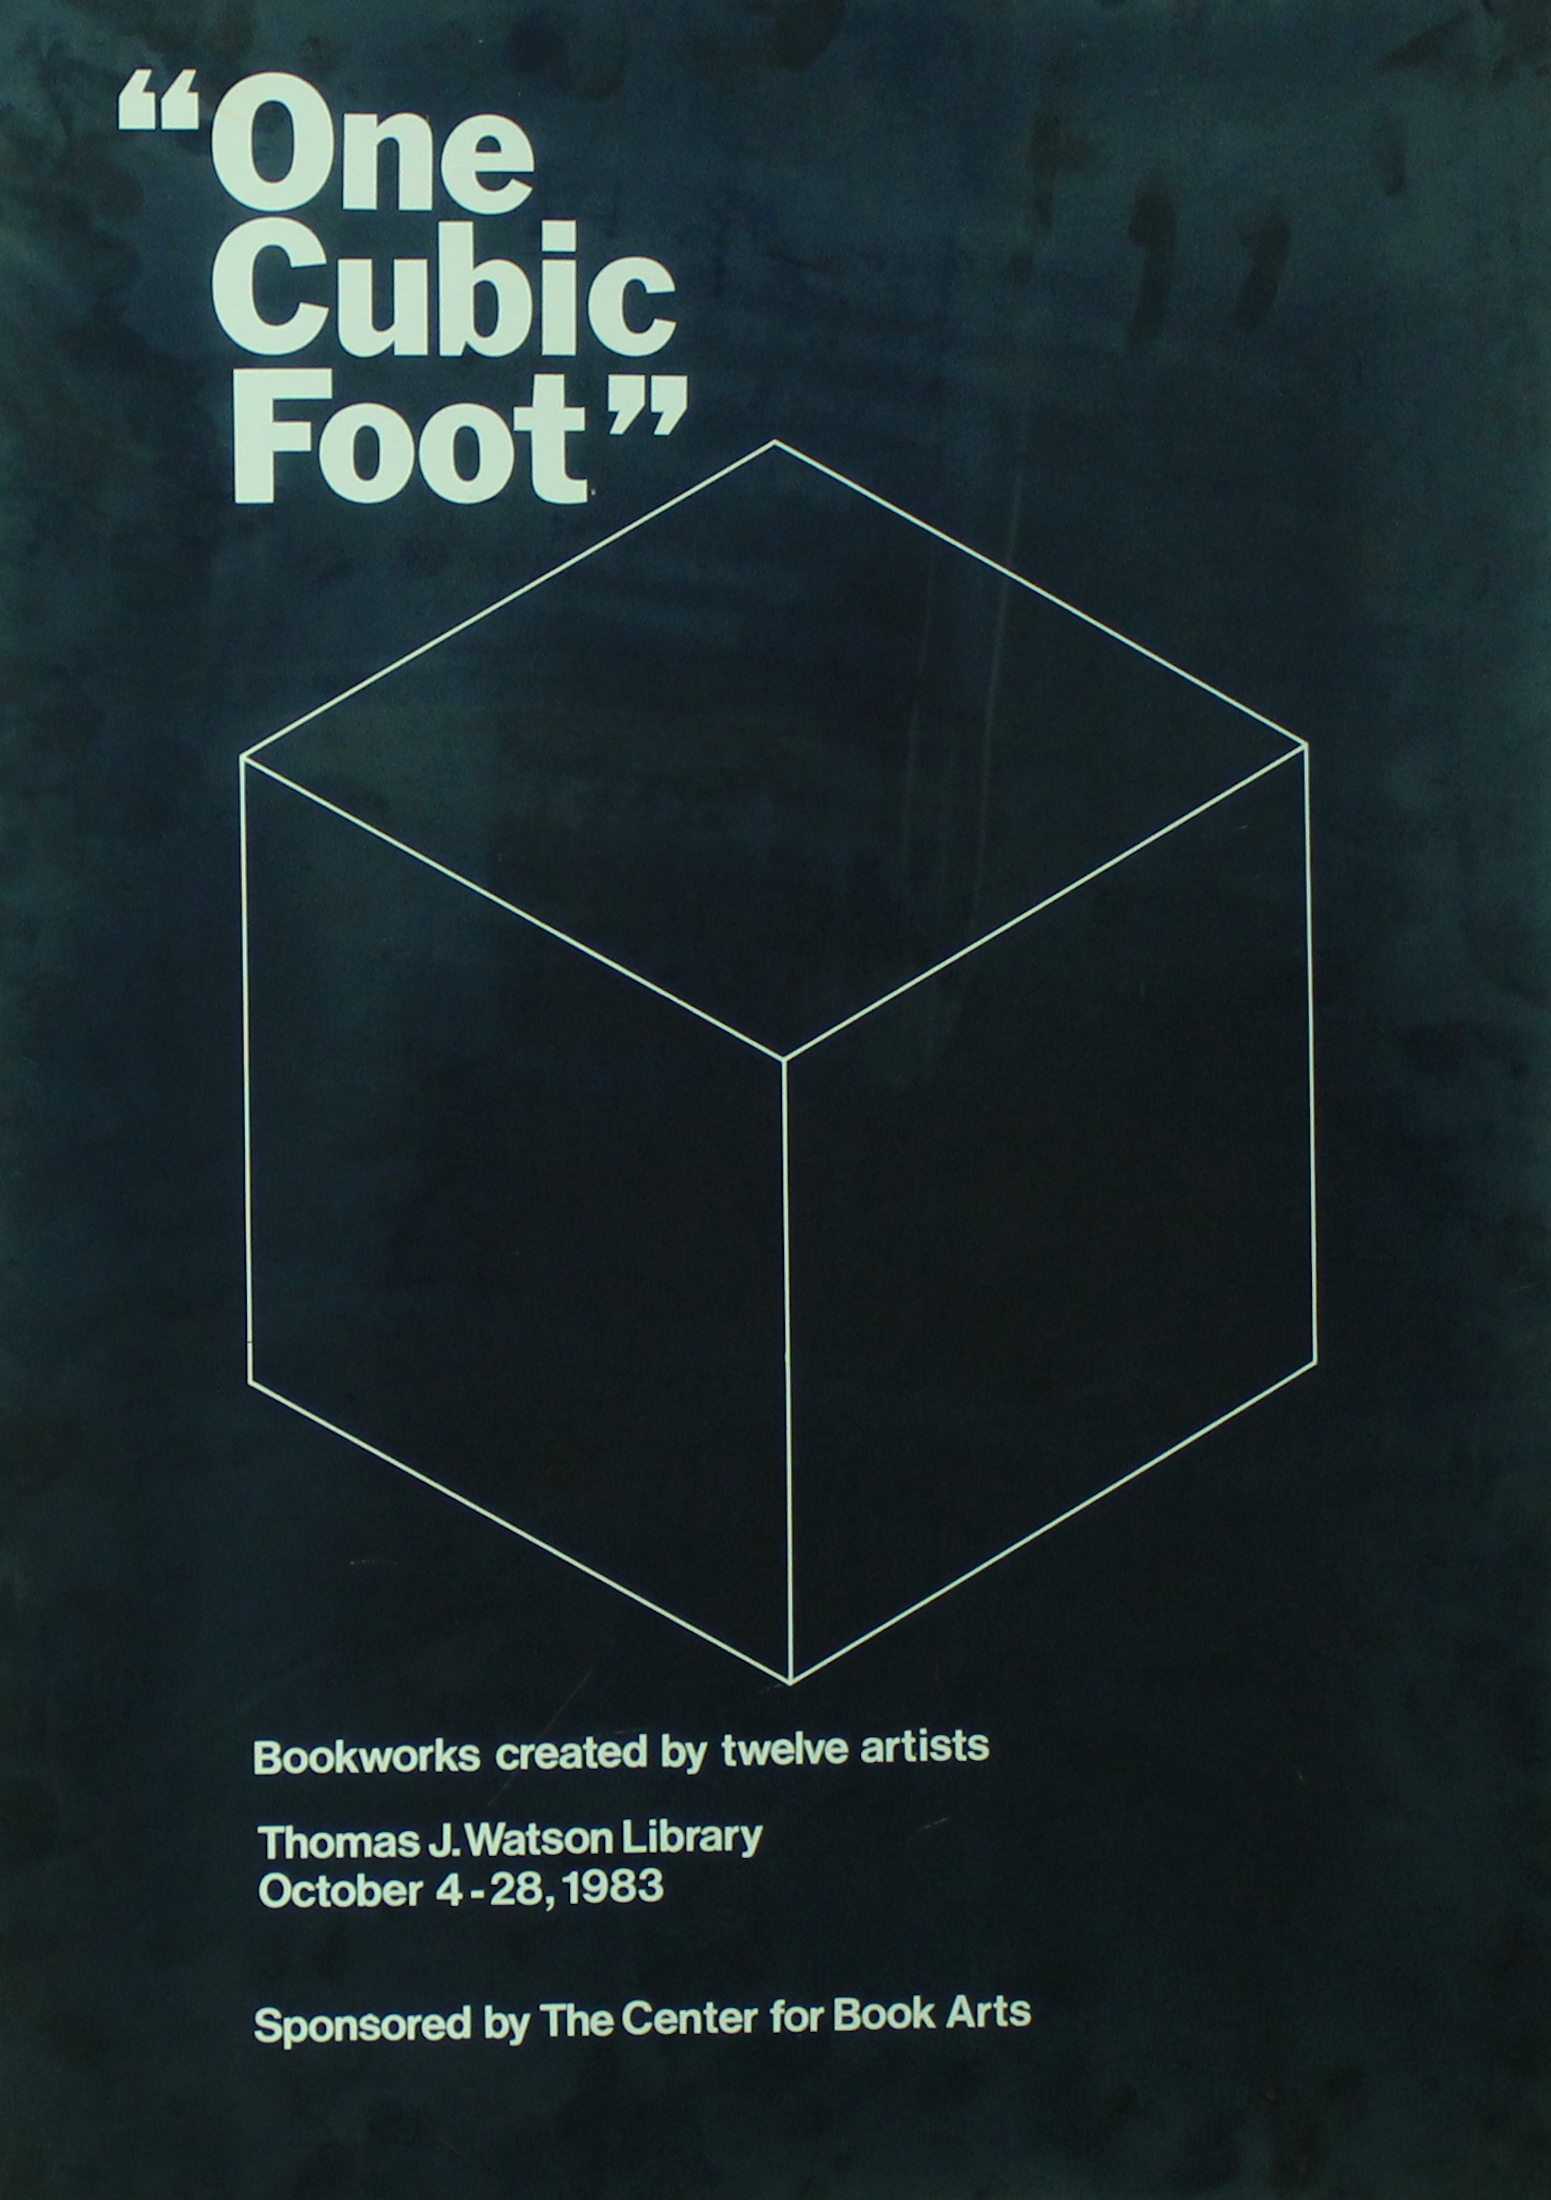 Black poster with white text and white cube. Title is in large, bold text in the top left corner. Other information is in smaller text in the bottom, left corner